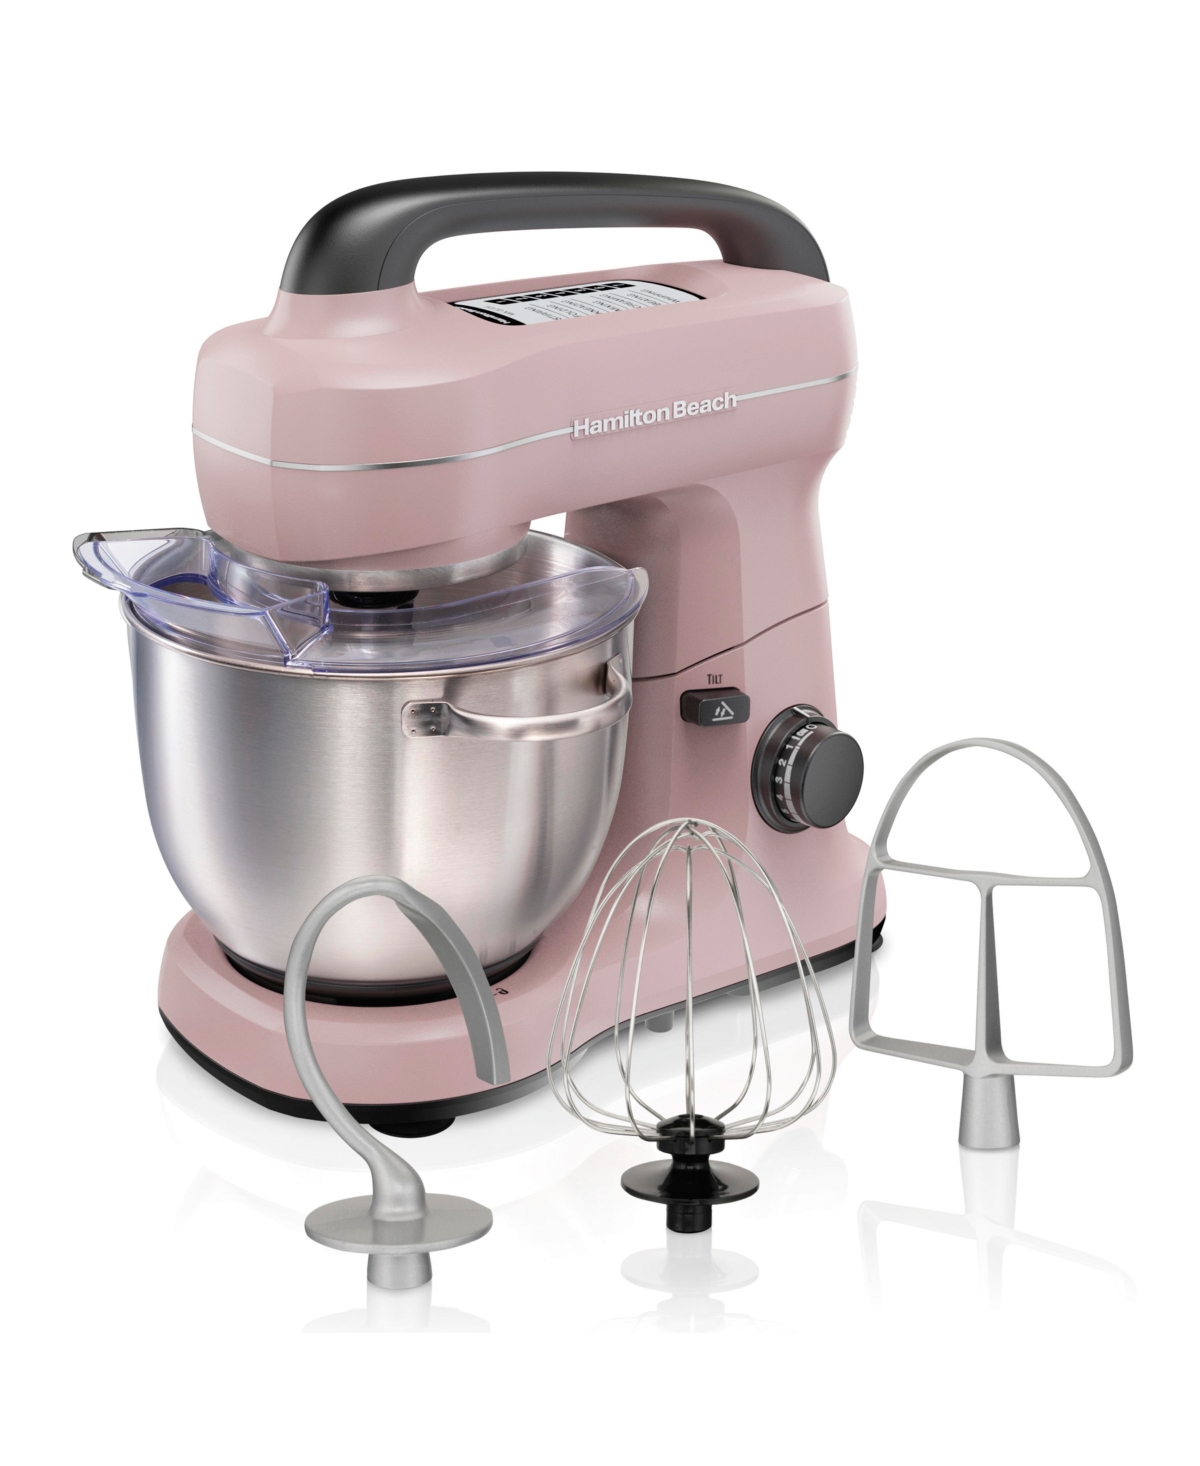 Hamilton Beach Stand Mixer With 4 Quart Stainless Steel Bowl In Rose